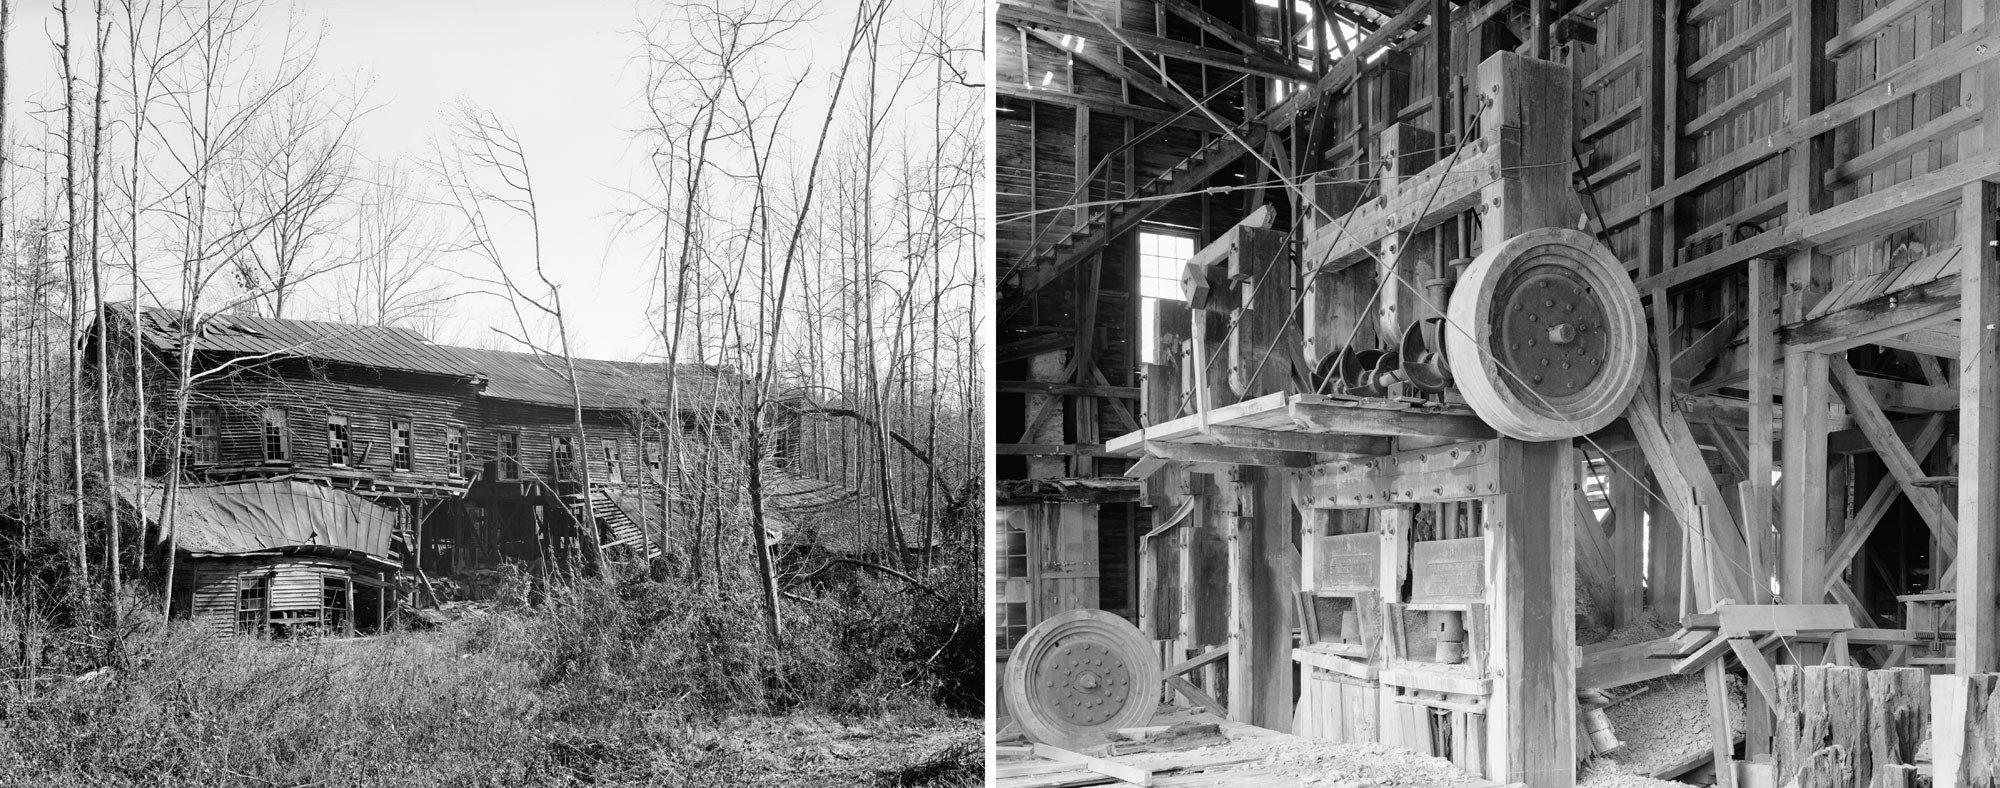 2-Panel image, black and white photos of the abandoned Coggins Gold Mine, North Carolina. Panel 1: Delapidated wooden building. Panel 2: Abandoned milling machinery inside the building.